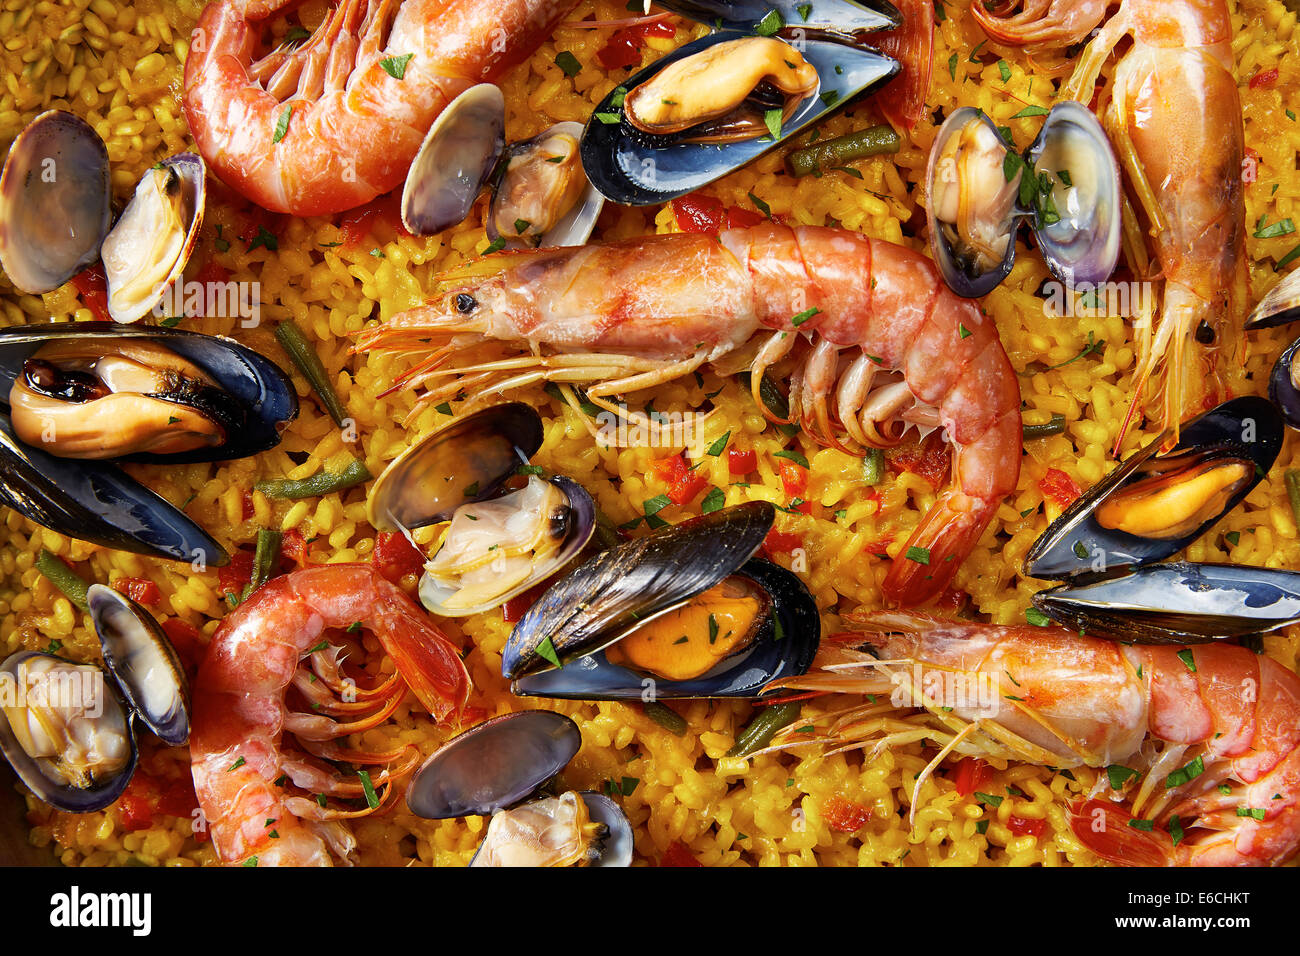 Typical spanish seafood paella close-up Stock Photo